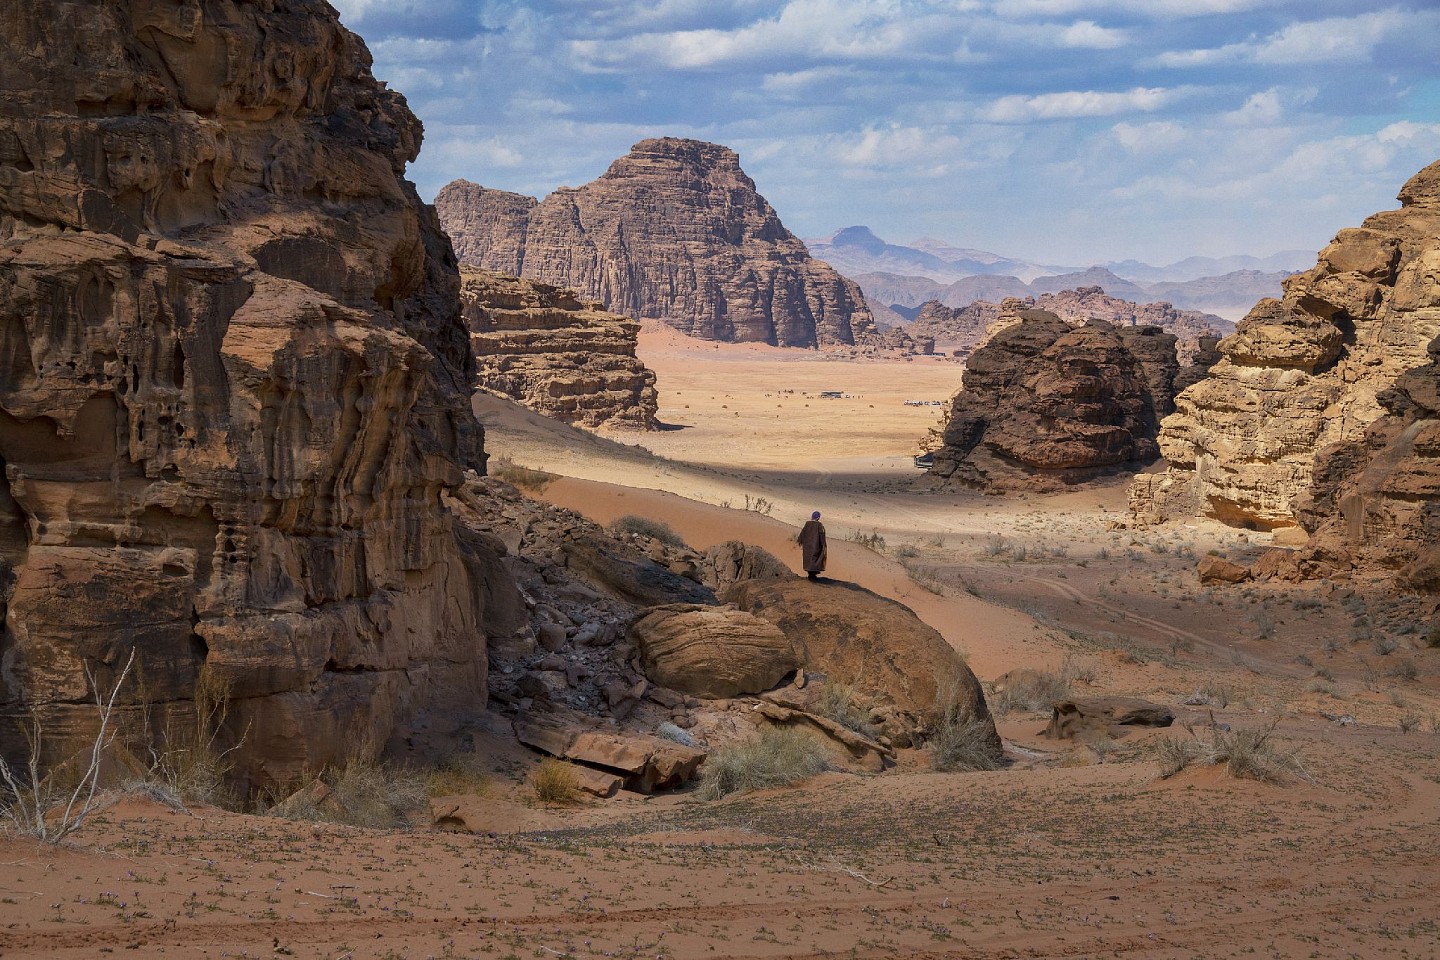 Steve McCurry, Wadi Rum, 2019
FujiFlex Crystal Archive Print
Price/Size on request